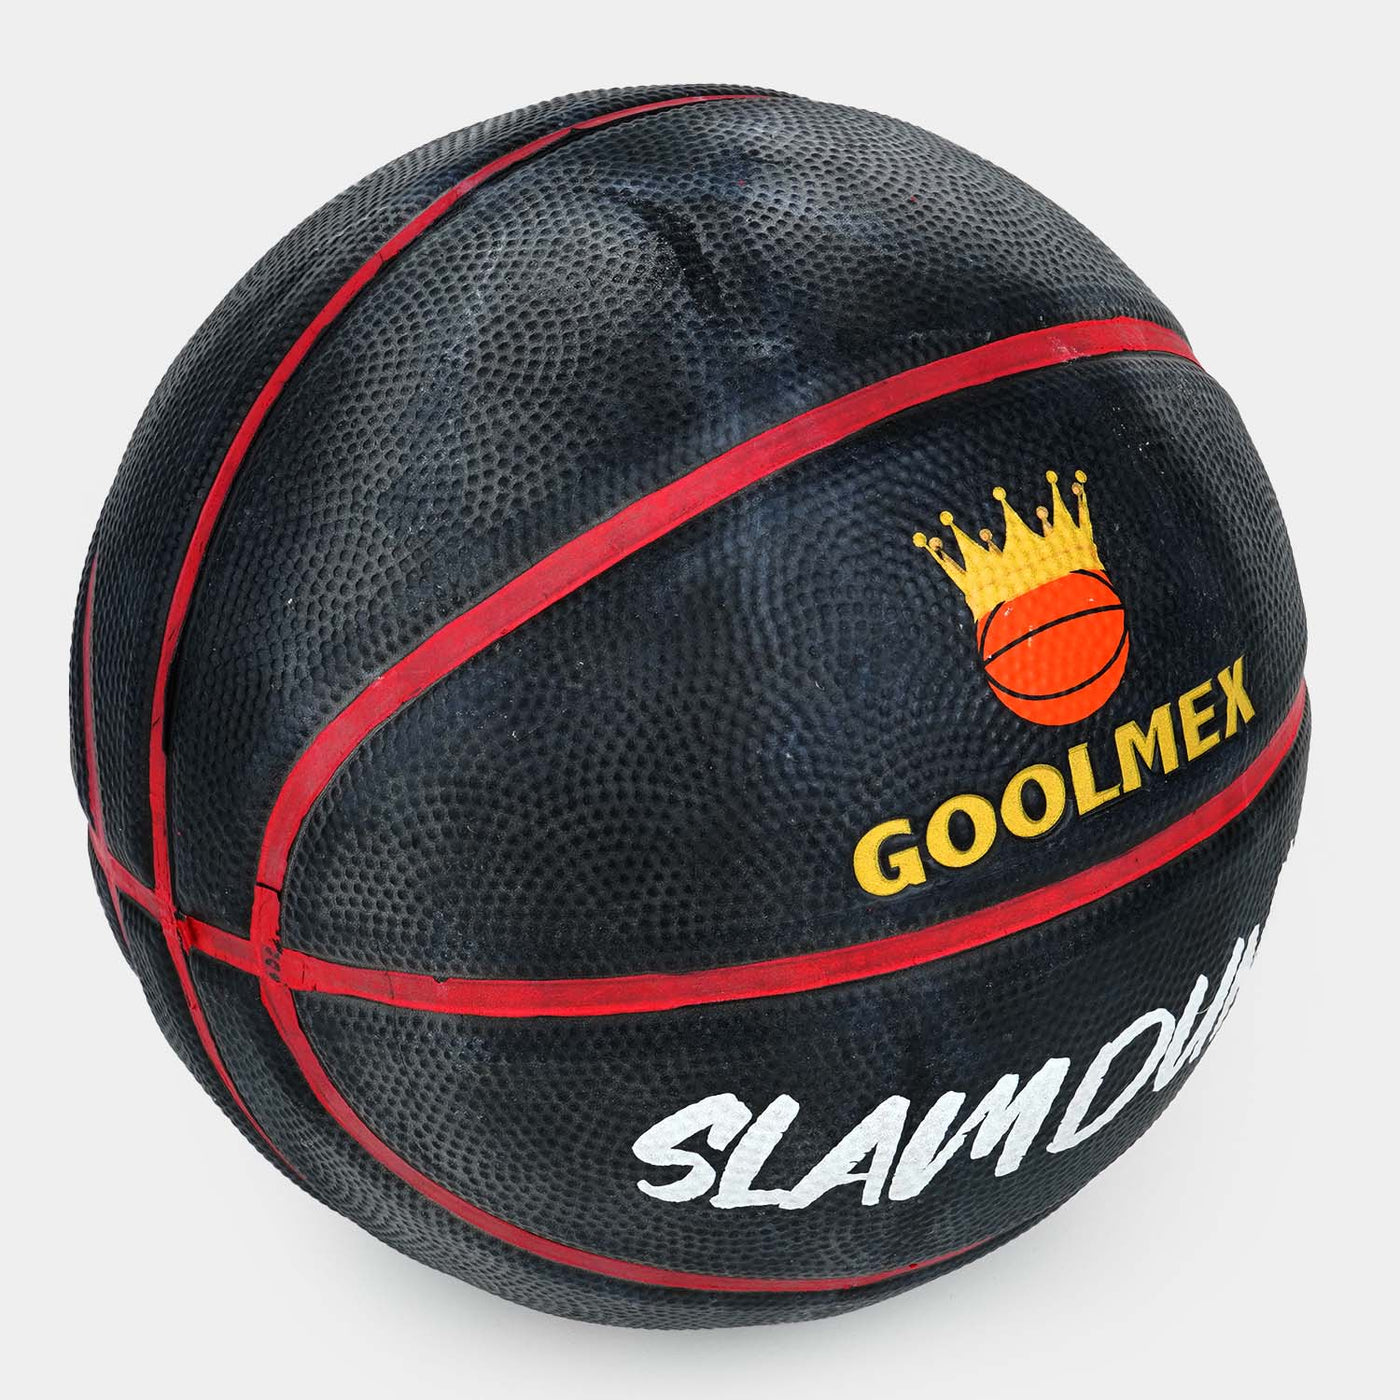 BASKET BALL FOR KIDS | SIZE 5